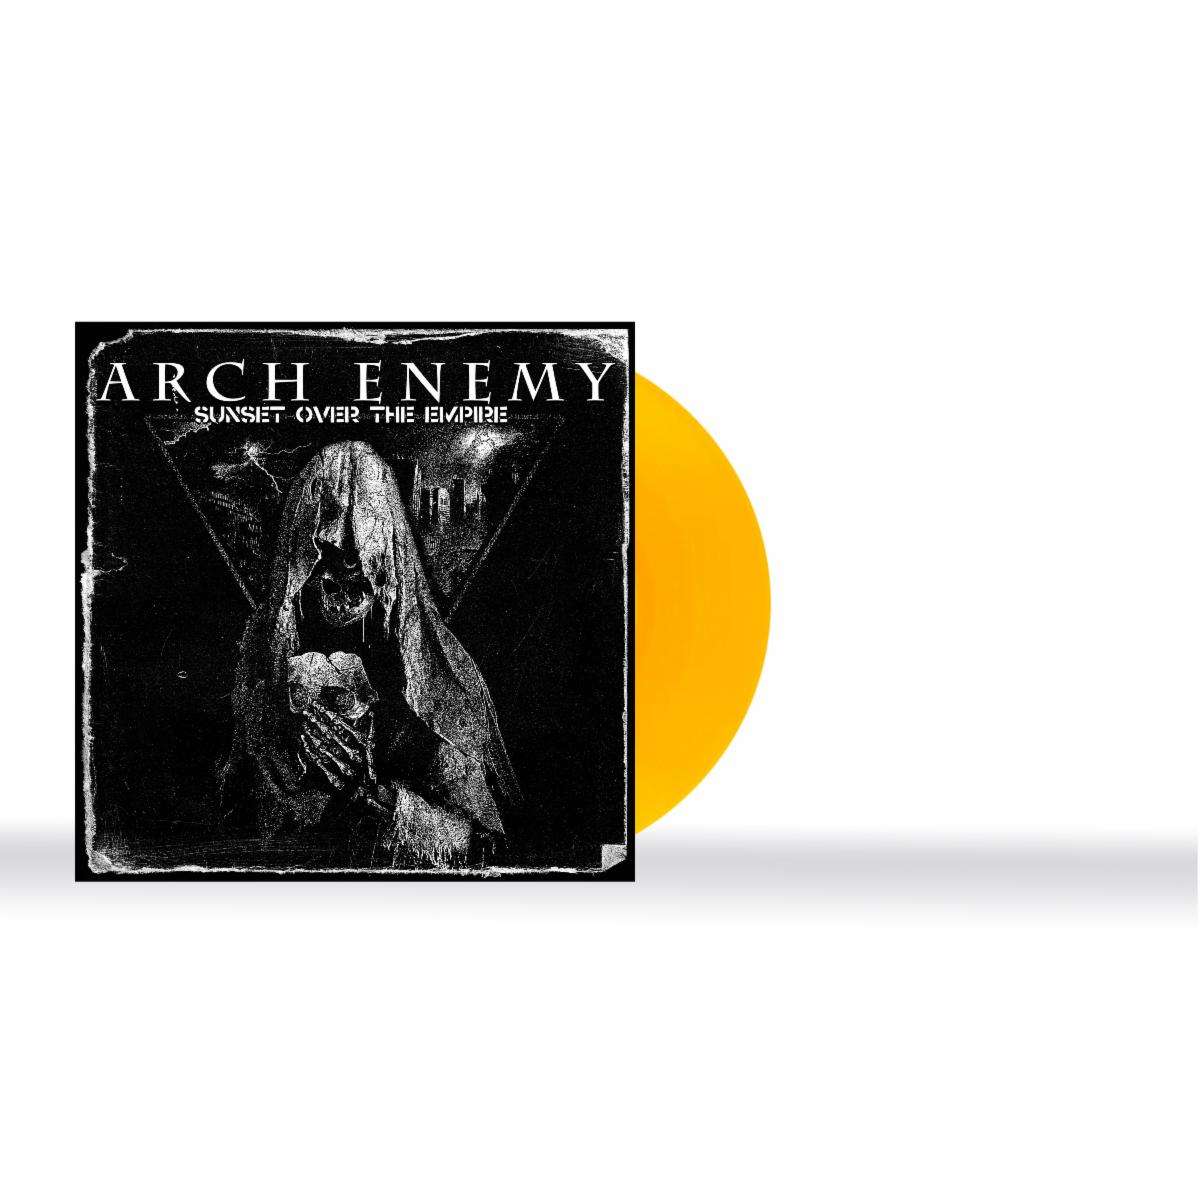 Arch Enemy launches Sunset Over The Empire pre-order 3